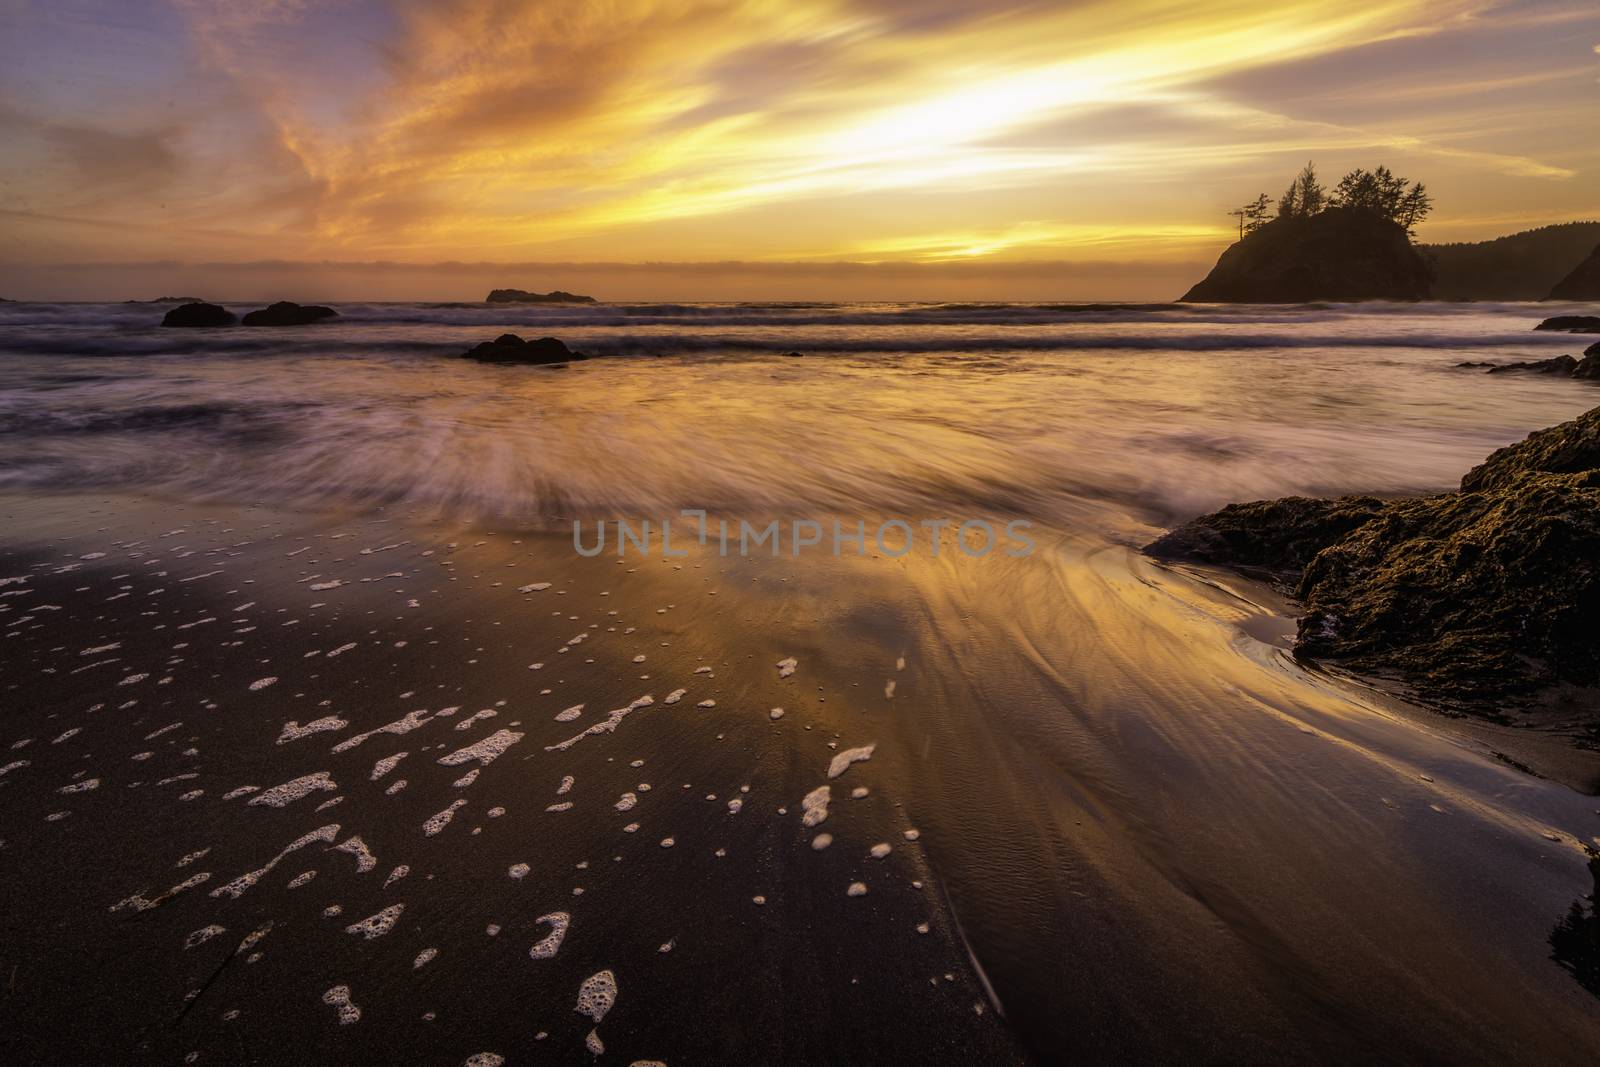 Sunset at a rocky beach with vivid warm colors and beautiful skies.